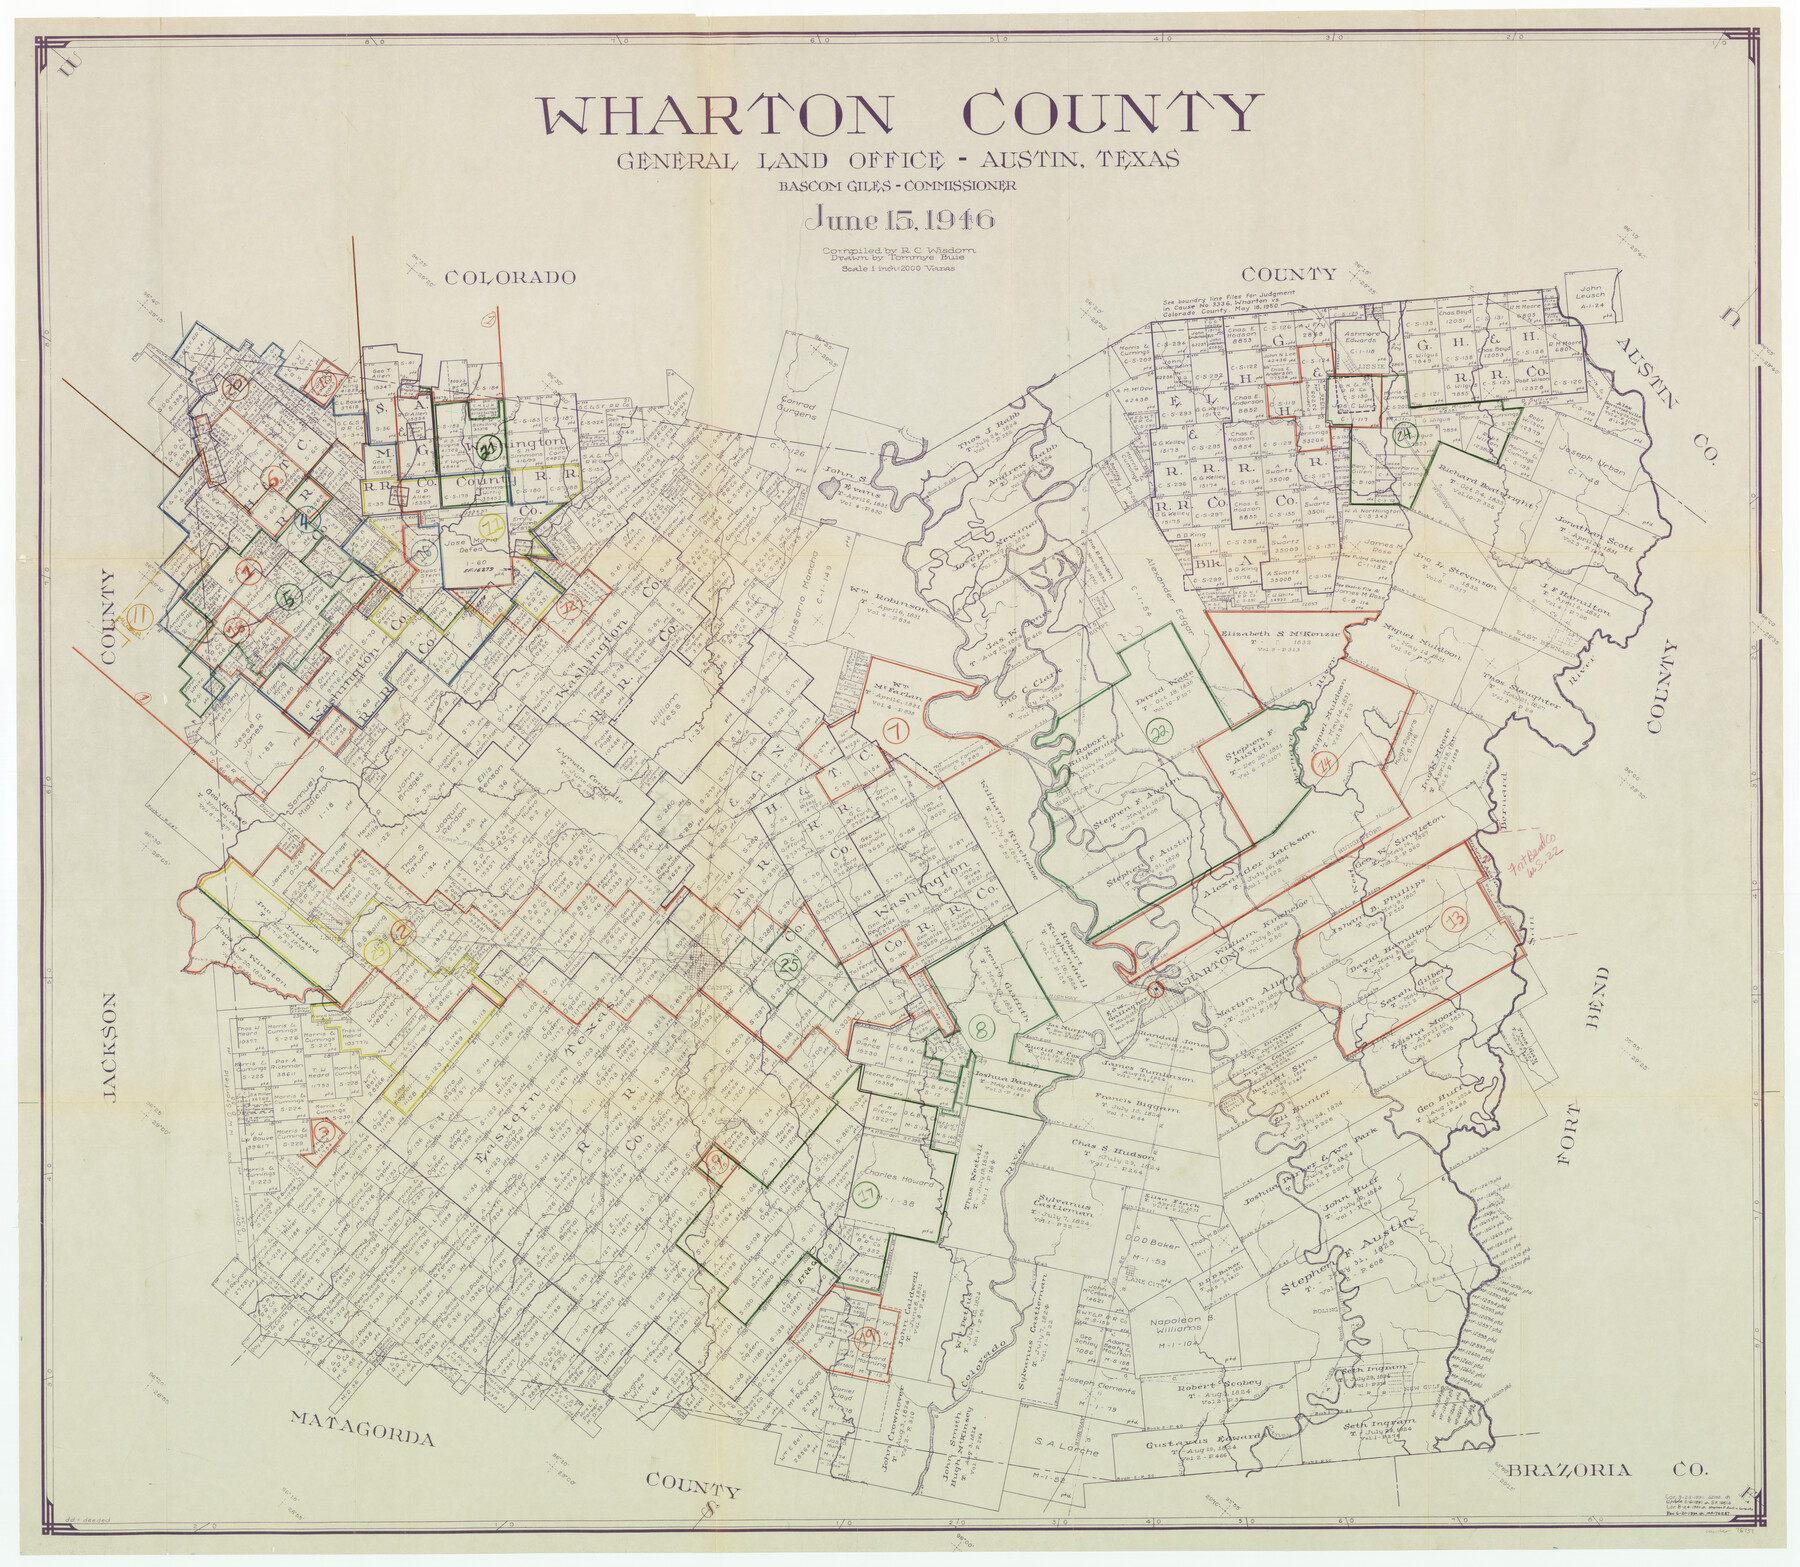 76737, Wharton County Working Sketch Graphic Index, General Map Collection